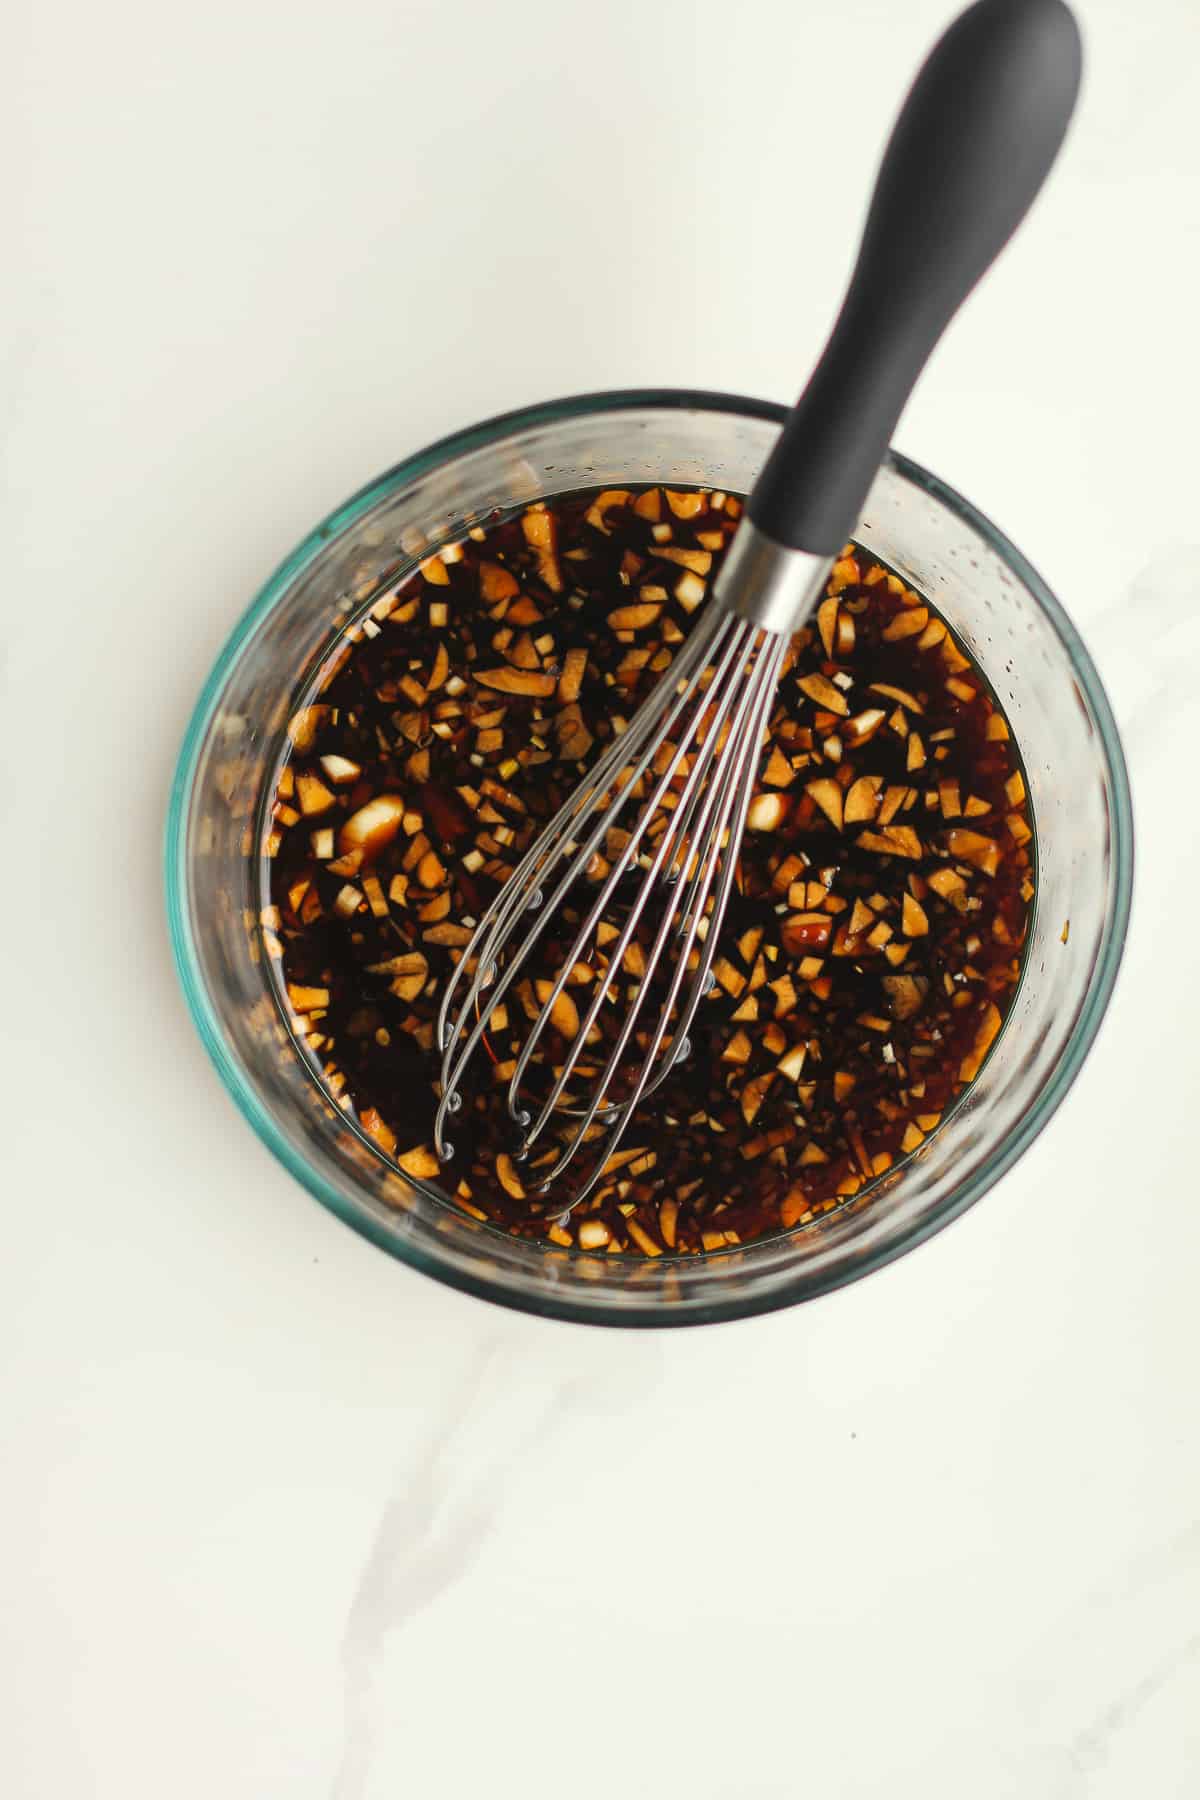 The marinade with a whisk.